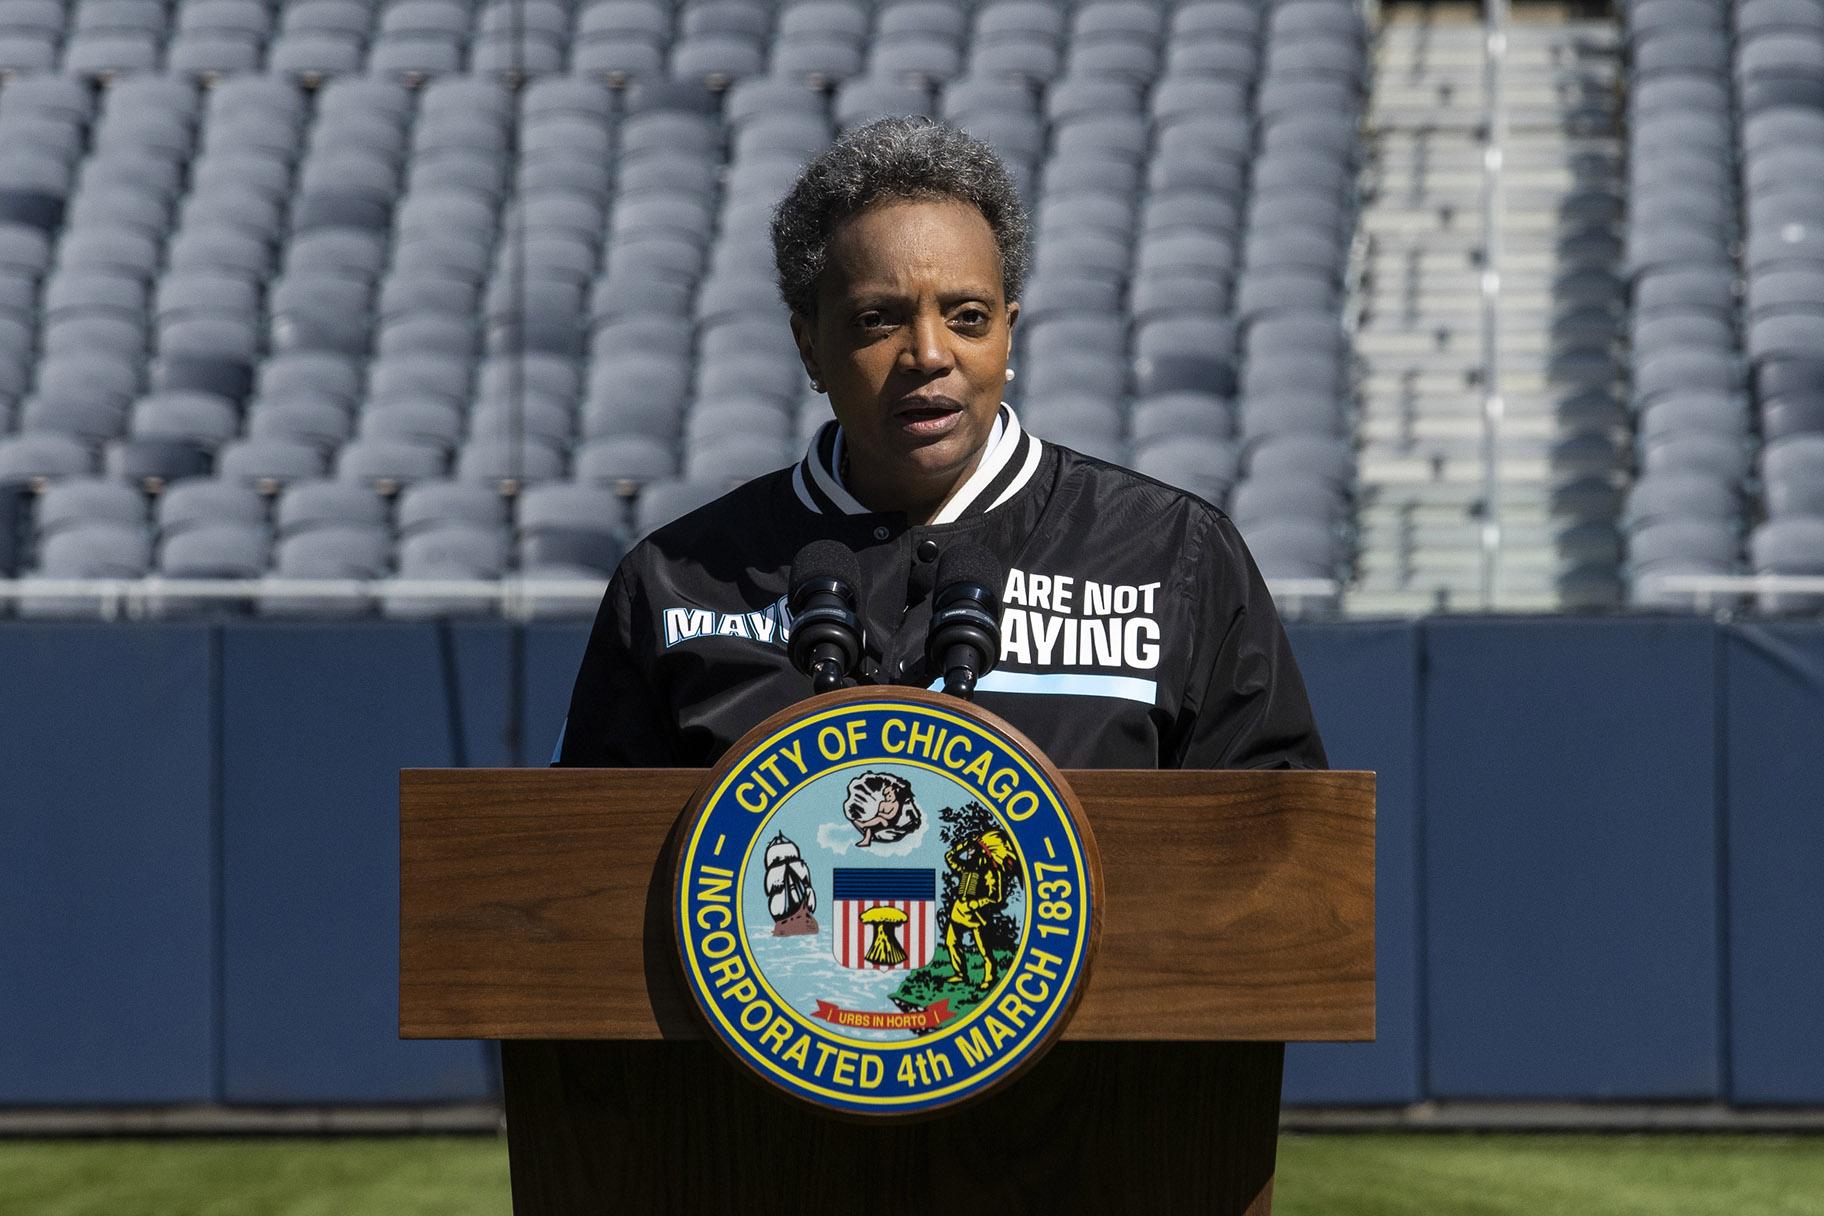 Mayor Lori Lightfoot announces the “We Are Not Playing” campaign during a press conference at Soldier Field, Monday morning, April 6, 2020, in Chicago.(Ashlee Rezin Garcia / Chicago Sun-Times via AP)